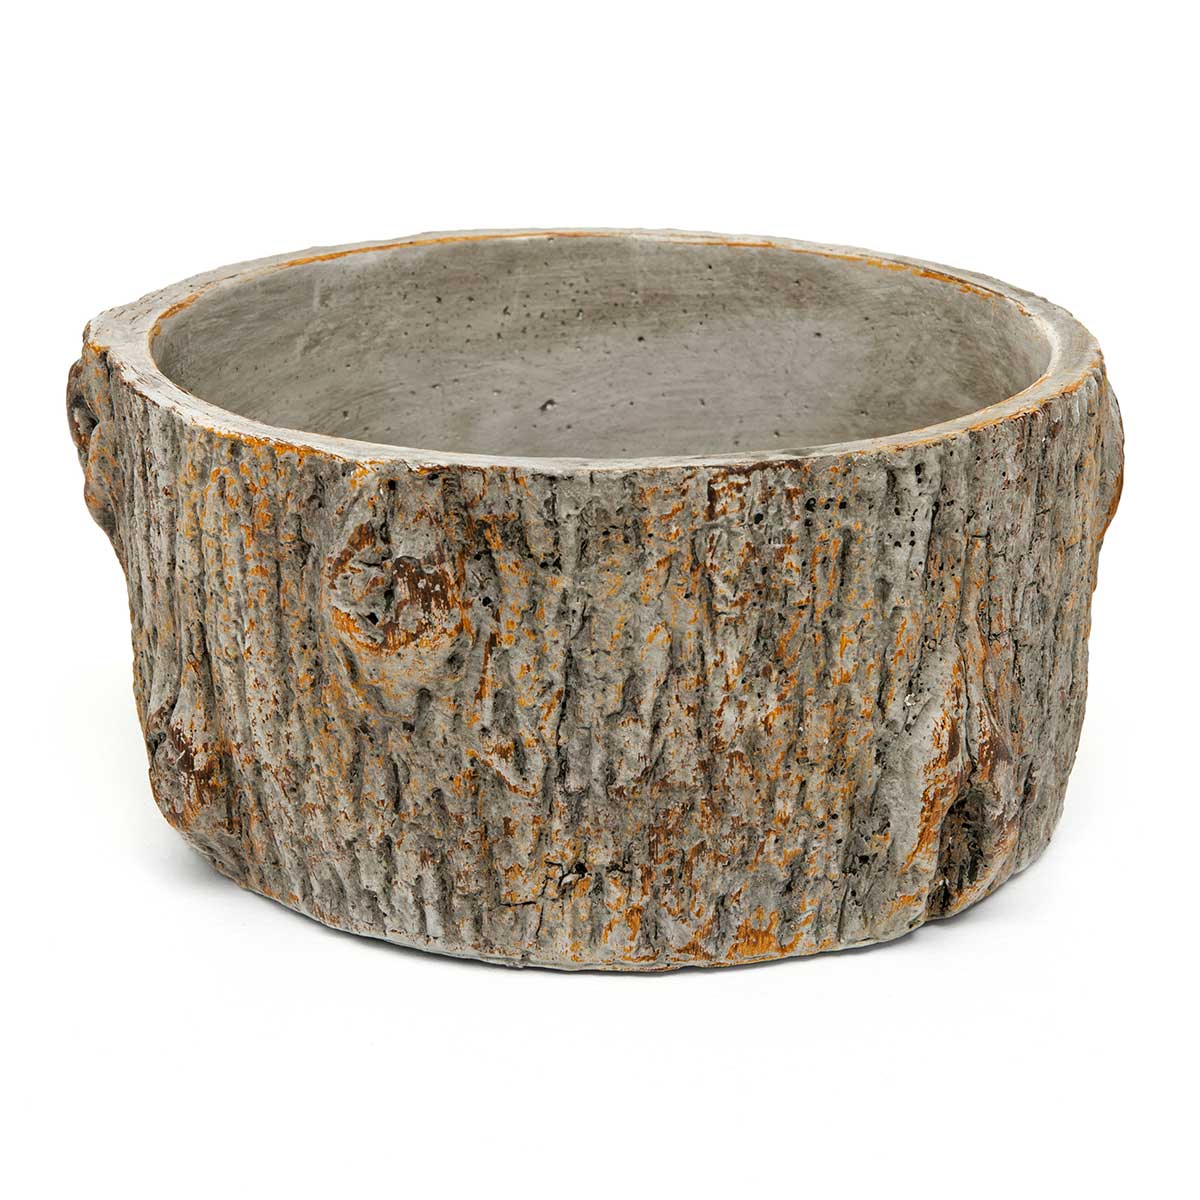 POT TREE TRUNK BOWL 7IN X 3.5IN BROWN CONCRETE